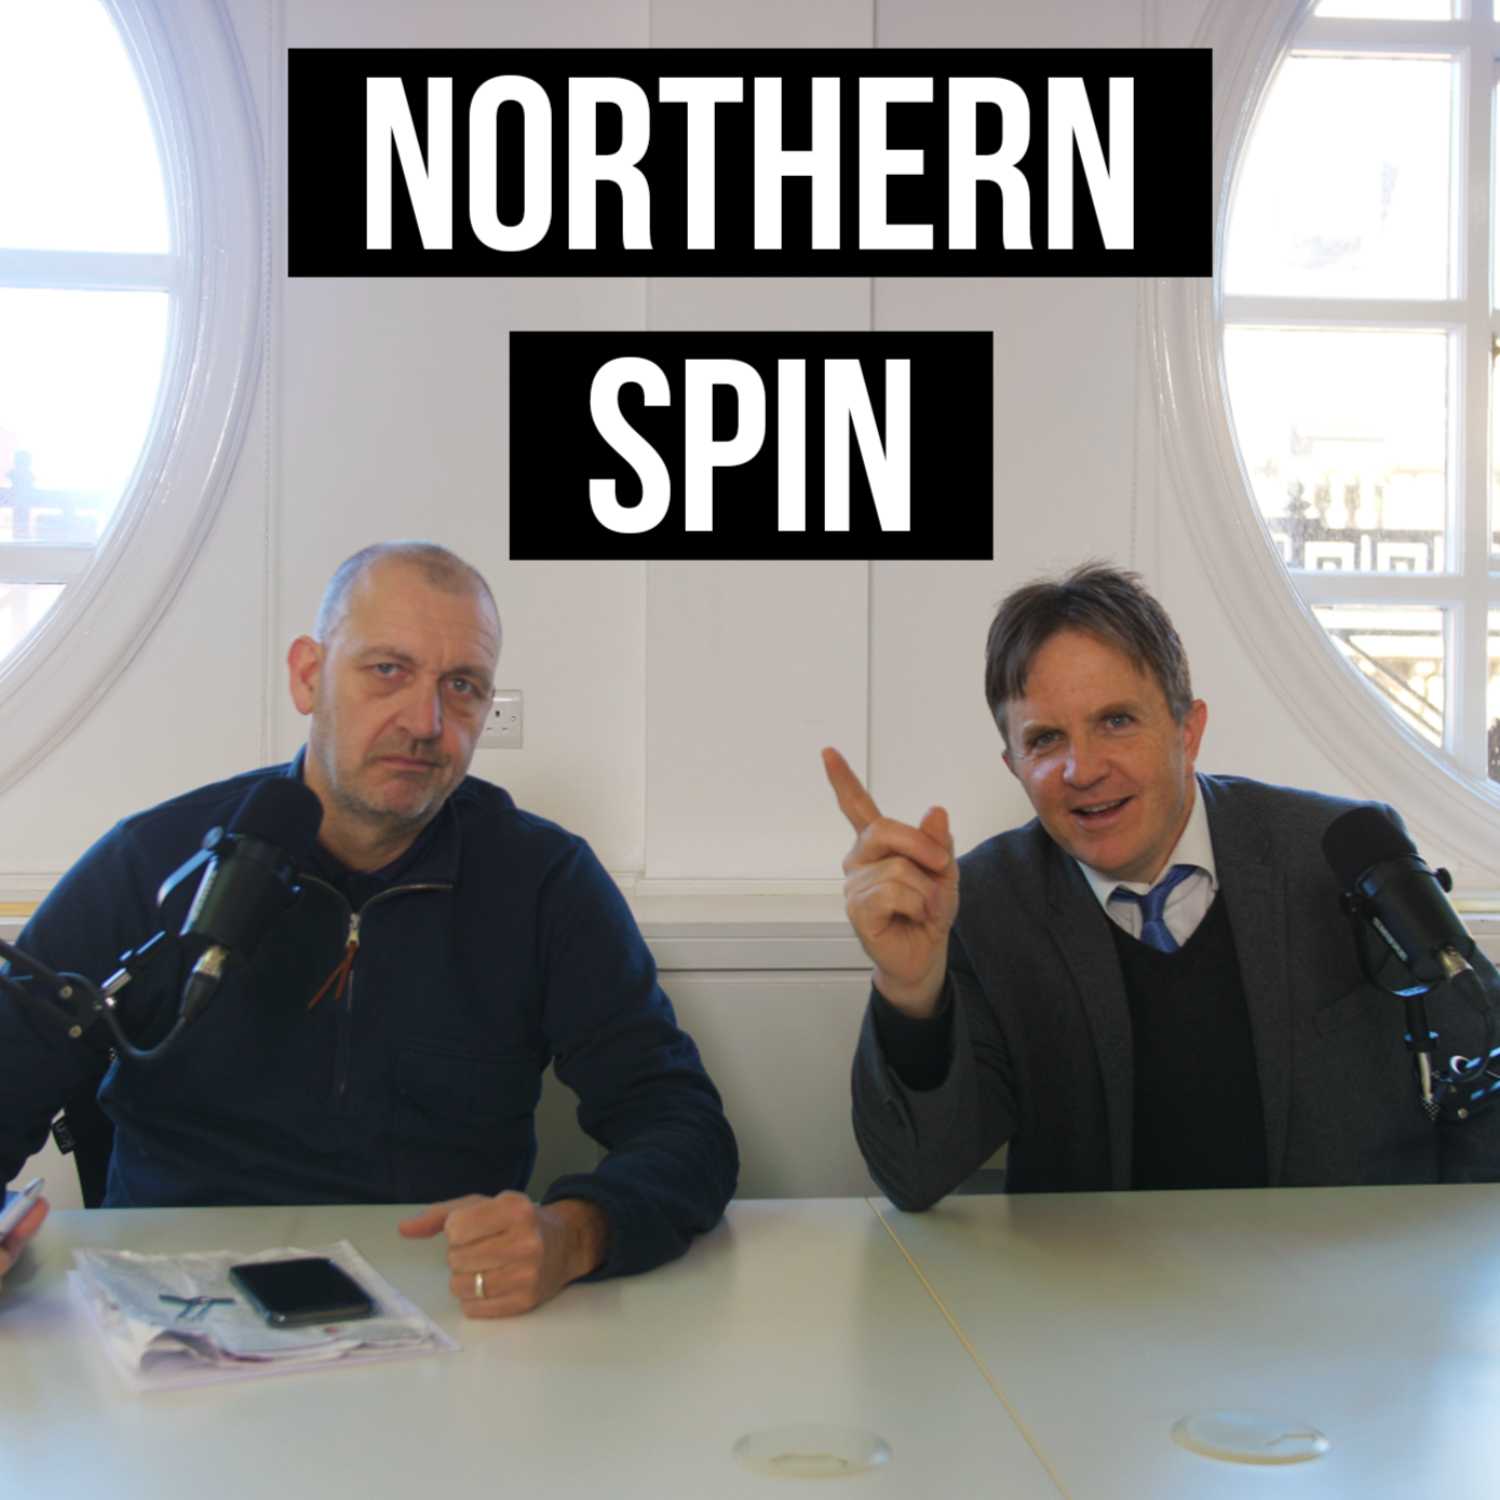 Northern Spin - Season 4 - Episode 3: STARMER’S (NO) FRIENDS UP NORTH